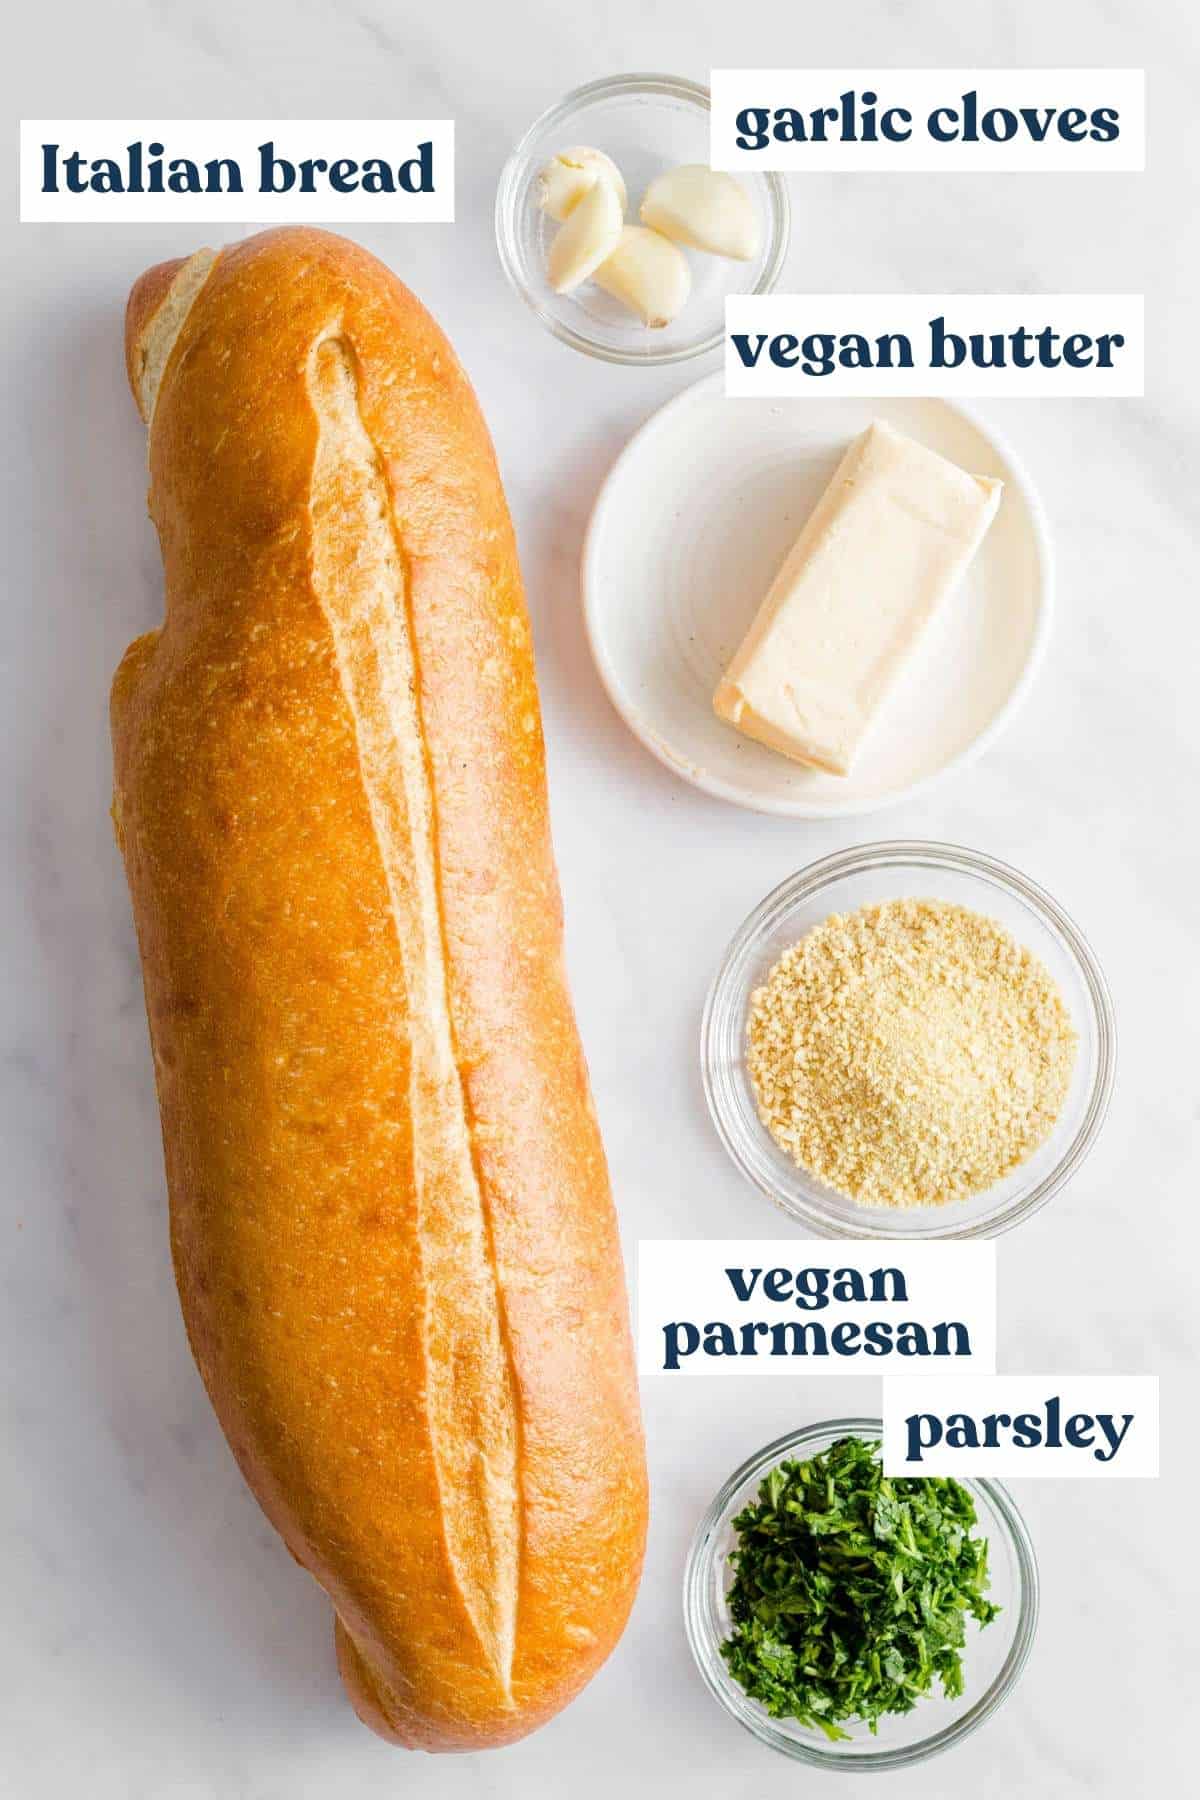 Ingredients needed for vegan garlic bread measured and labeled.